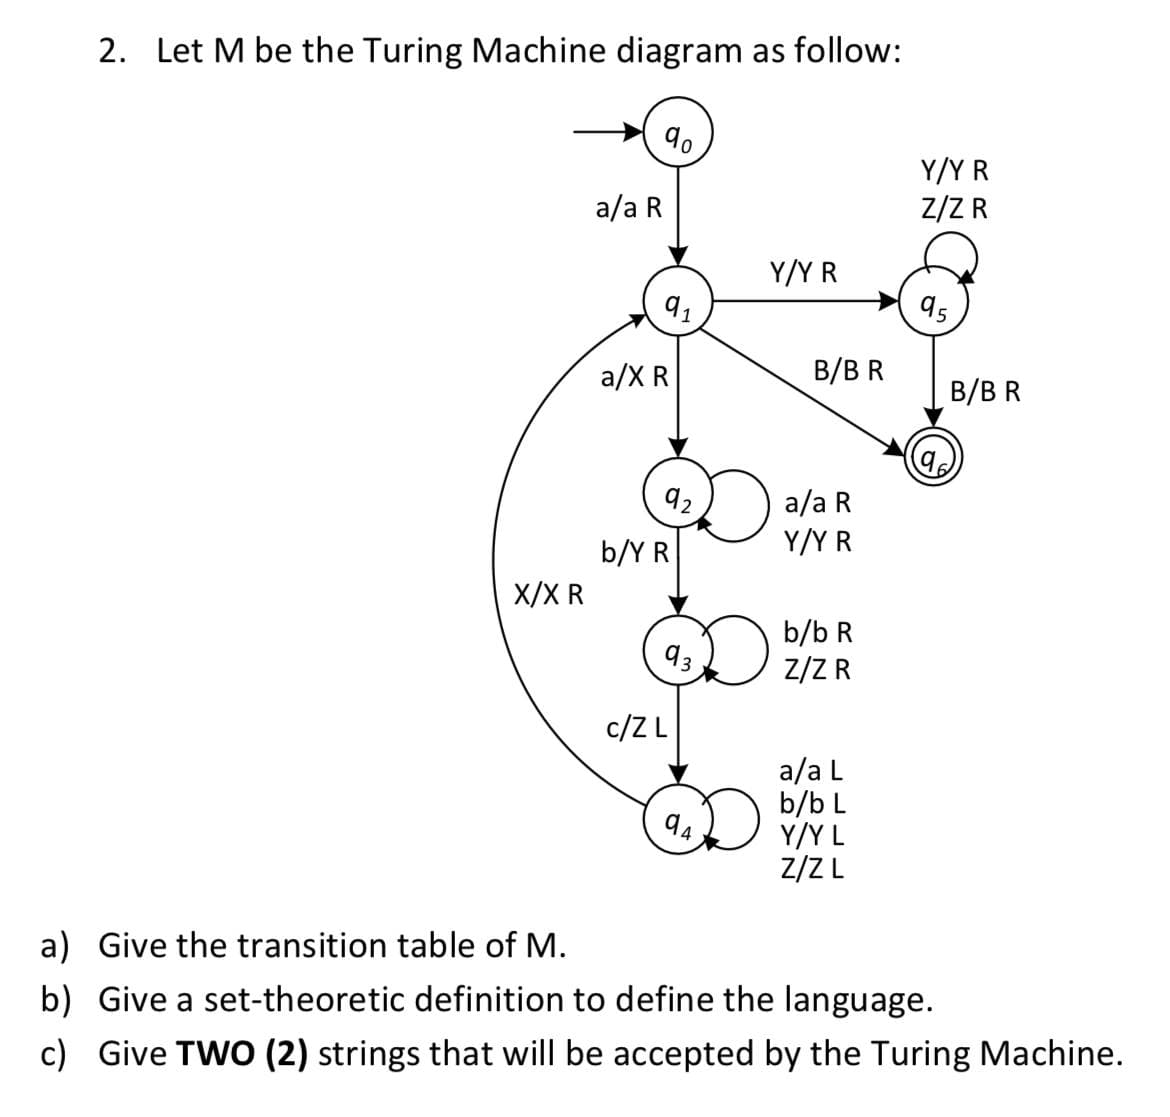 2. Let M be the Turing Machine diagram as follow:
90
a/a R
Y/Y R
a/a R
Y/Y R
b/b R
Z/Z R
a/a L
94
b/b L
Y/Y L
Z/Z L
a)
Give the transition table of M.
b) Give a set-theoretic definition to define the language.
c) Give TWO (2) strings that will be accepted by the Turing Machine.
X/X R
91
a/X R
92
b/Y R
c/Z L
D
B/B R
Y/Y R
Z/Z R
95
B/BR
96